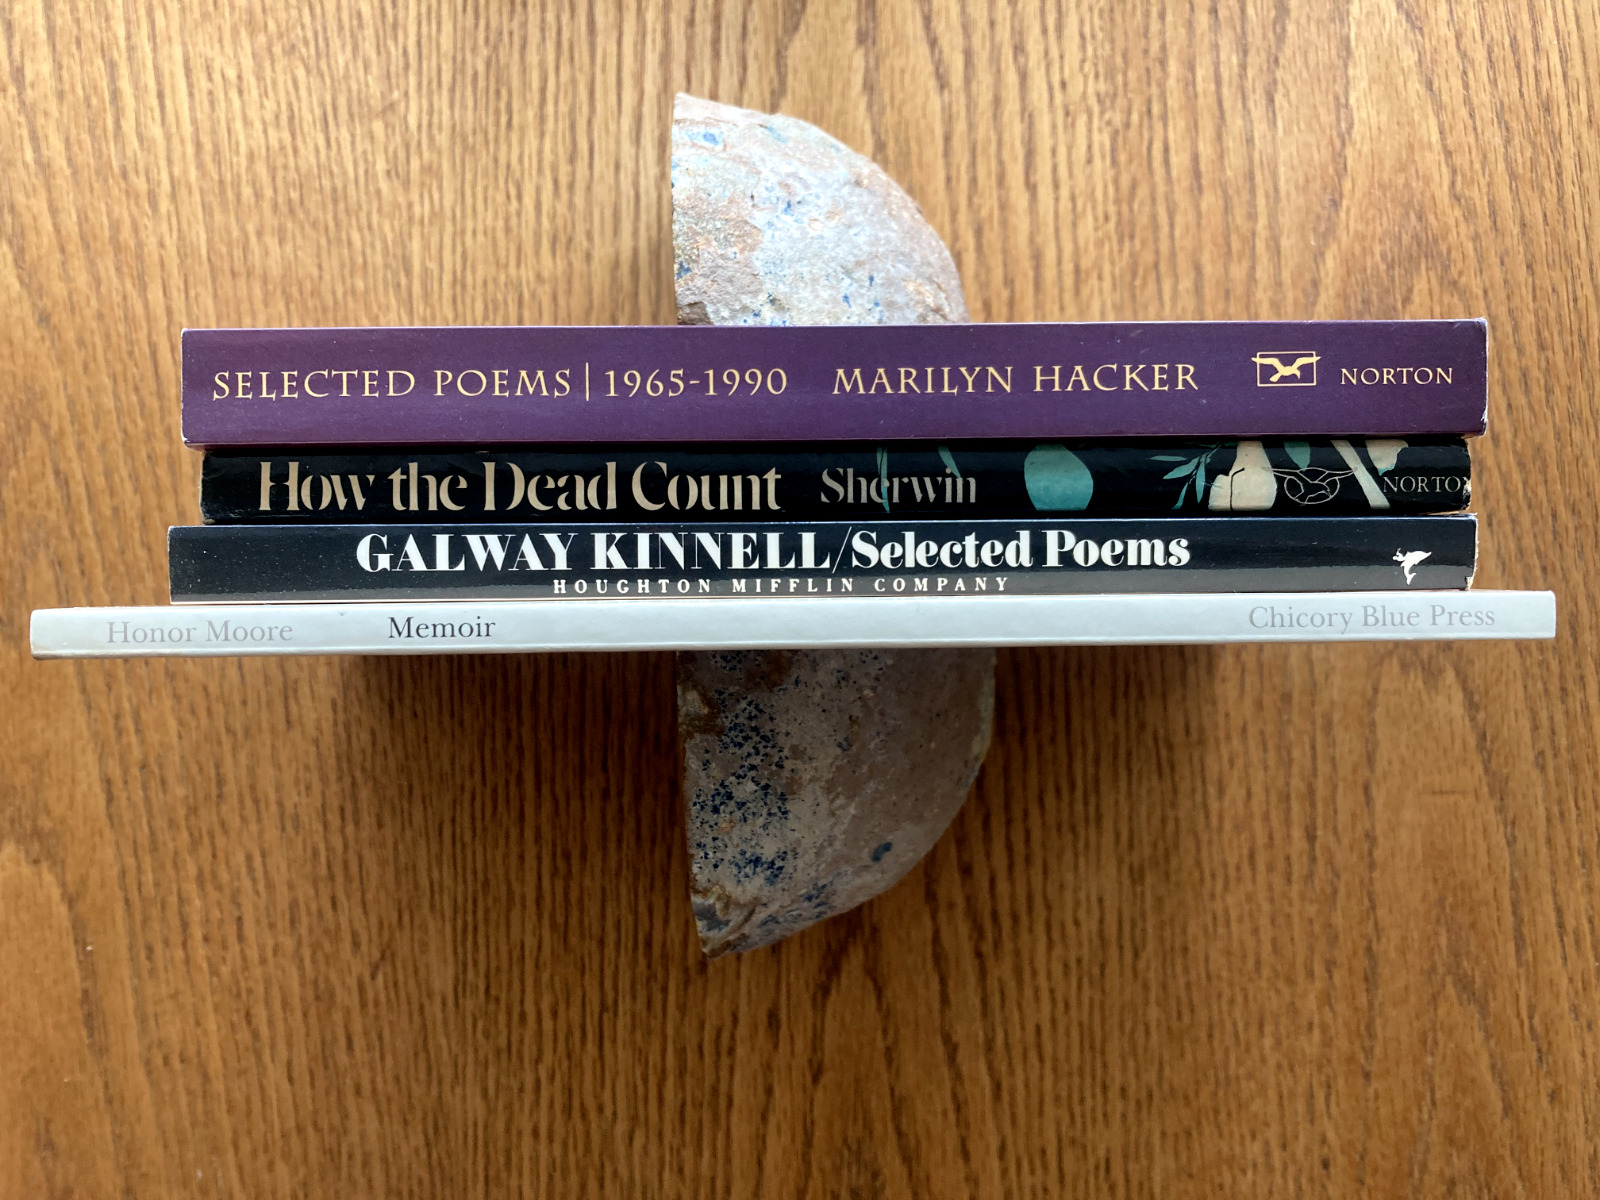 Lot of 4 SIGNED or INSCRIBED Poetry Books. Hacker, Kinnell, Sherwin, Moore. VG